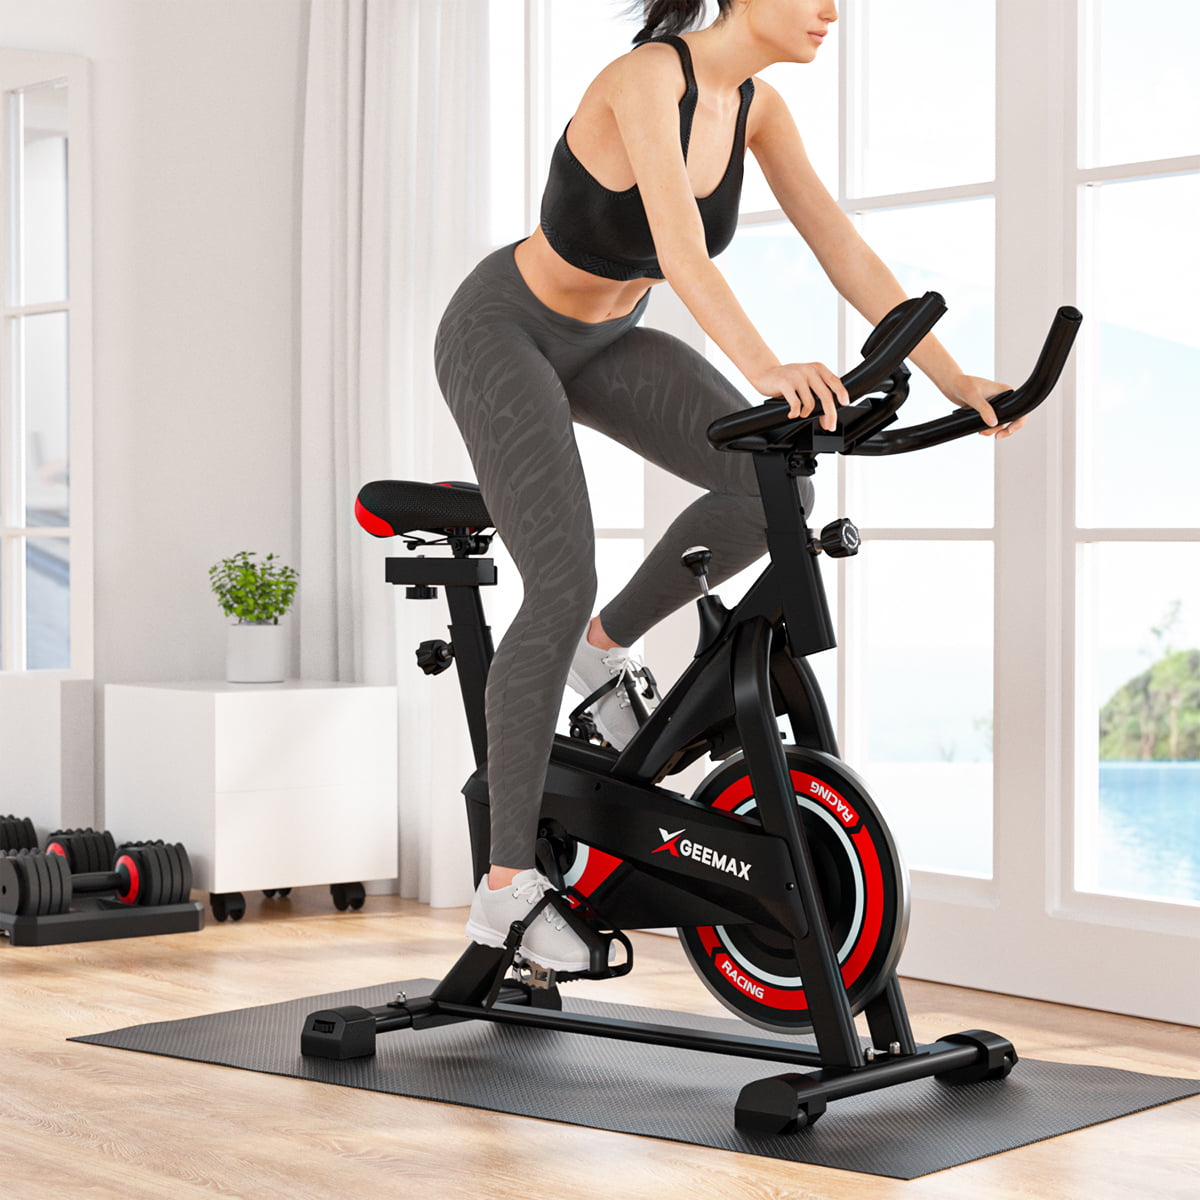 Exercise Bike,Indoor Stationary Cycling Bike Aerobic Fitness Workout Equipment with Multi-Speed Adjustment of Resistance and Pulse LCD Display for Home Living Room Office 